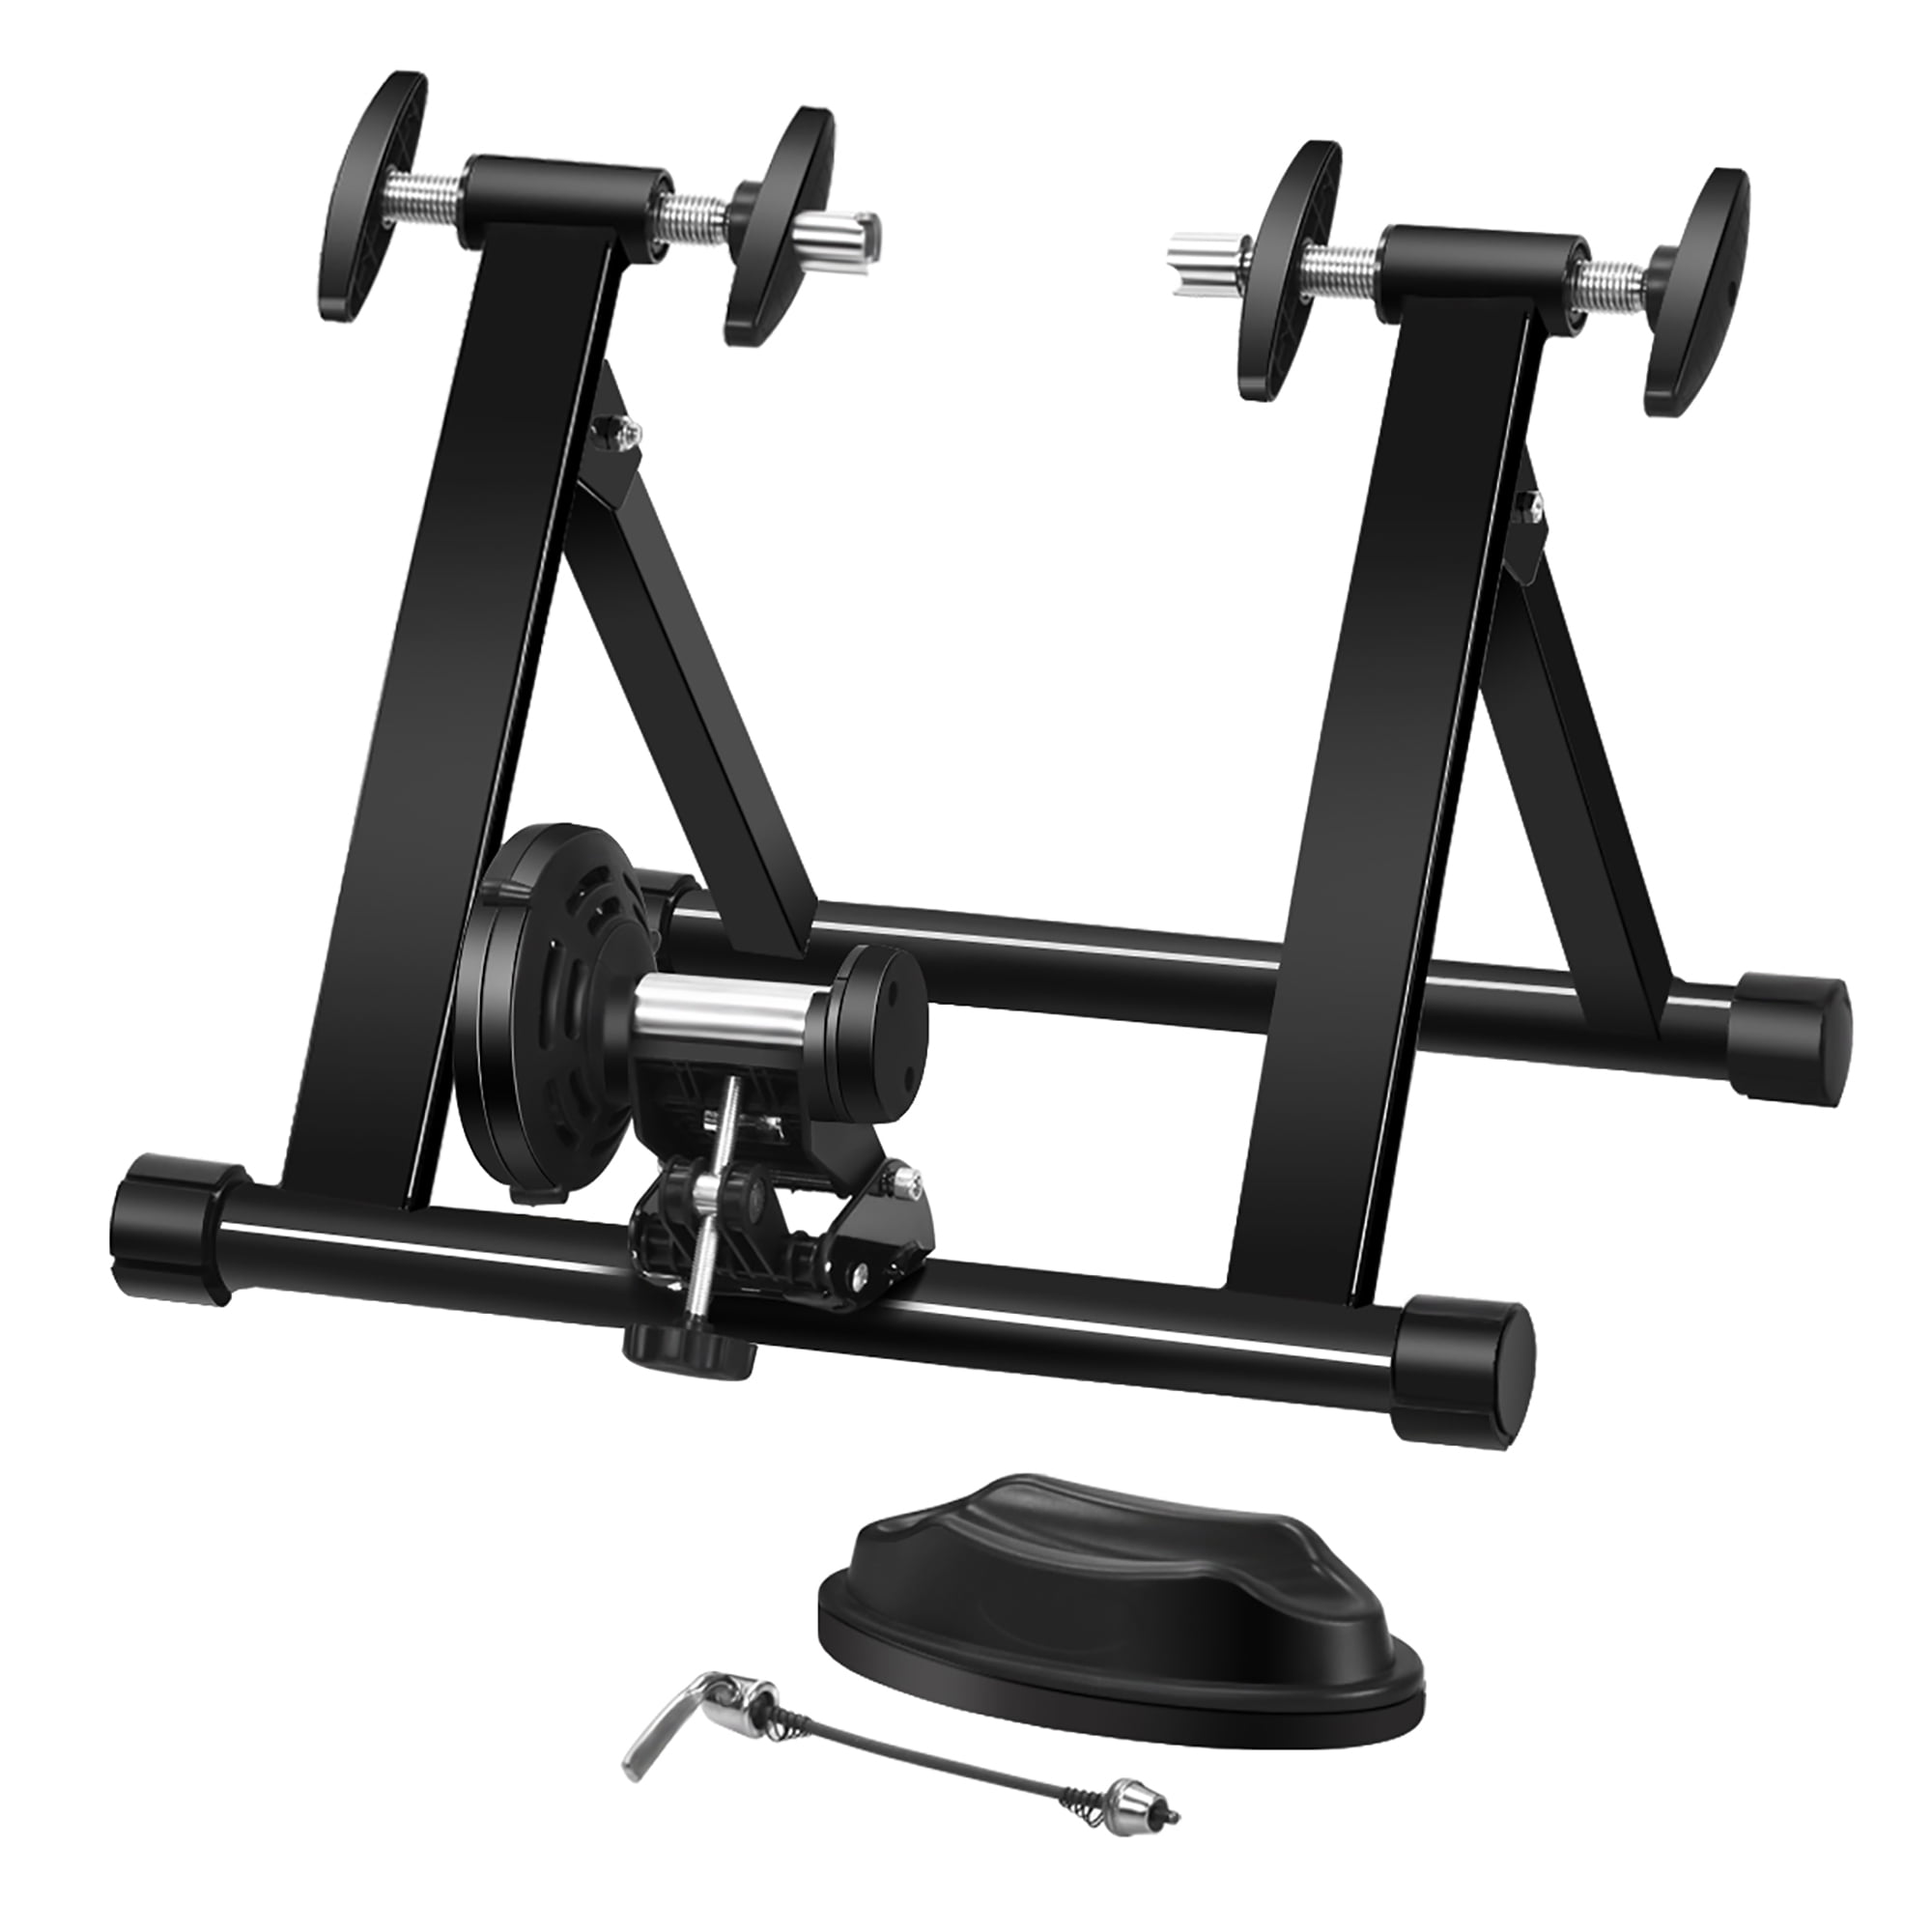 Details about   Magnetic Bike Bicycle Trainer Indoor Stationary Exercise Stand Steel Frame Black 